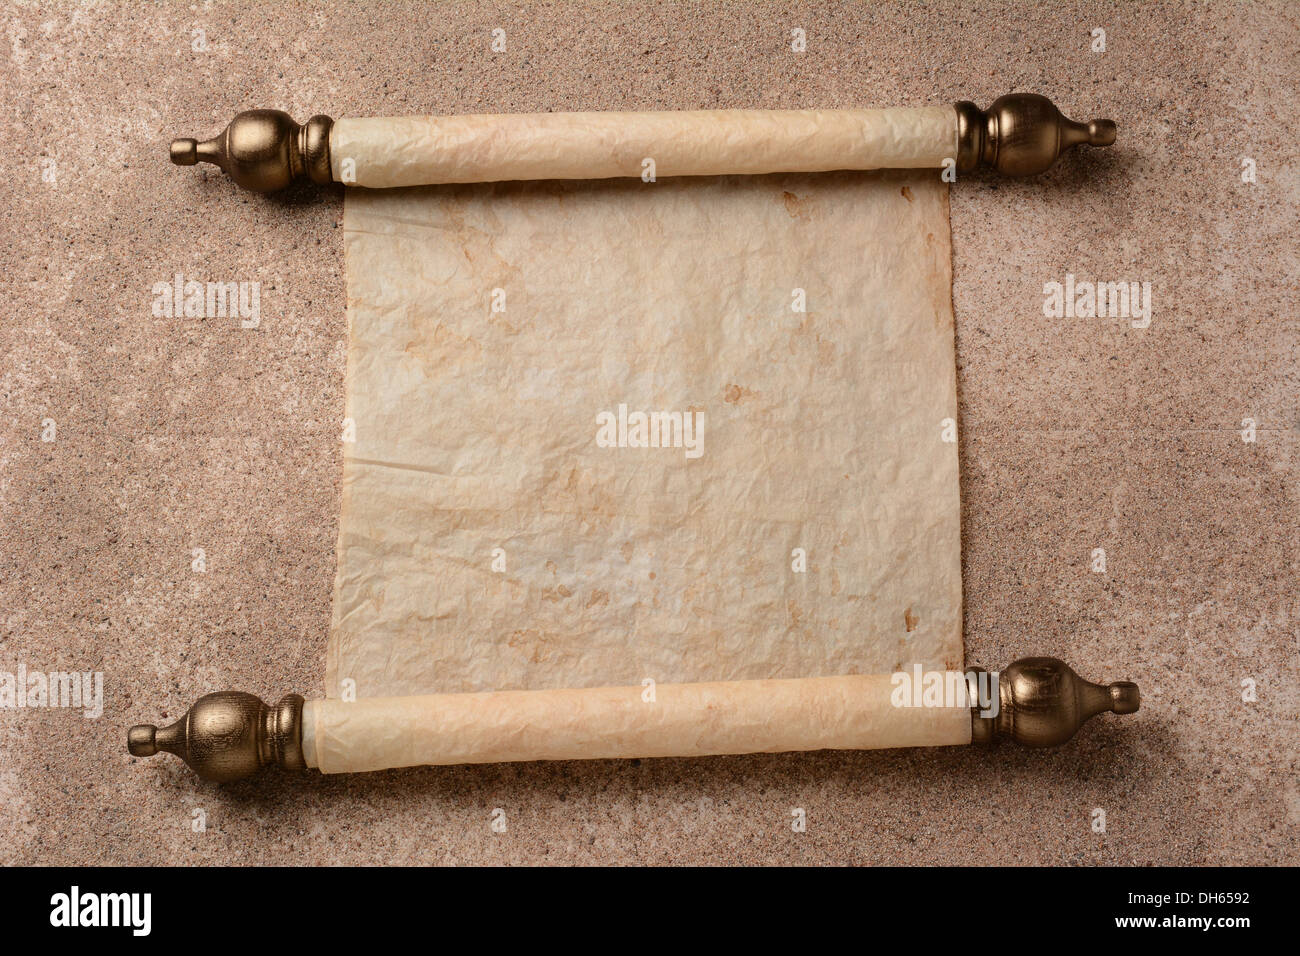 A rolled out scroll of parchment on a sand covered floor. The paper is blank ready for your copy. Stock Photo